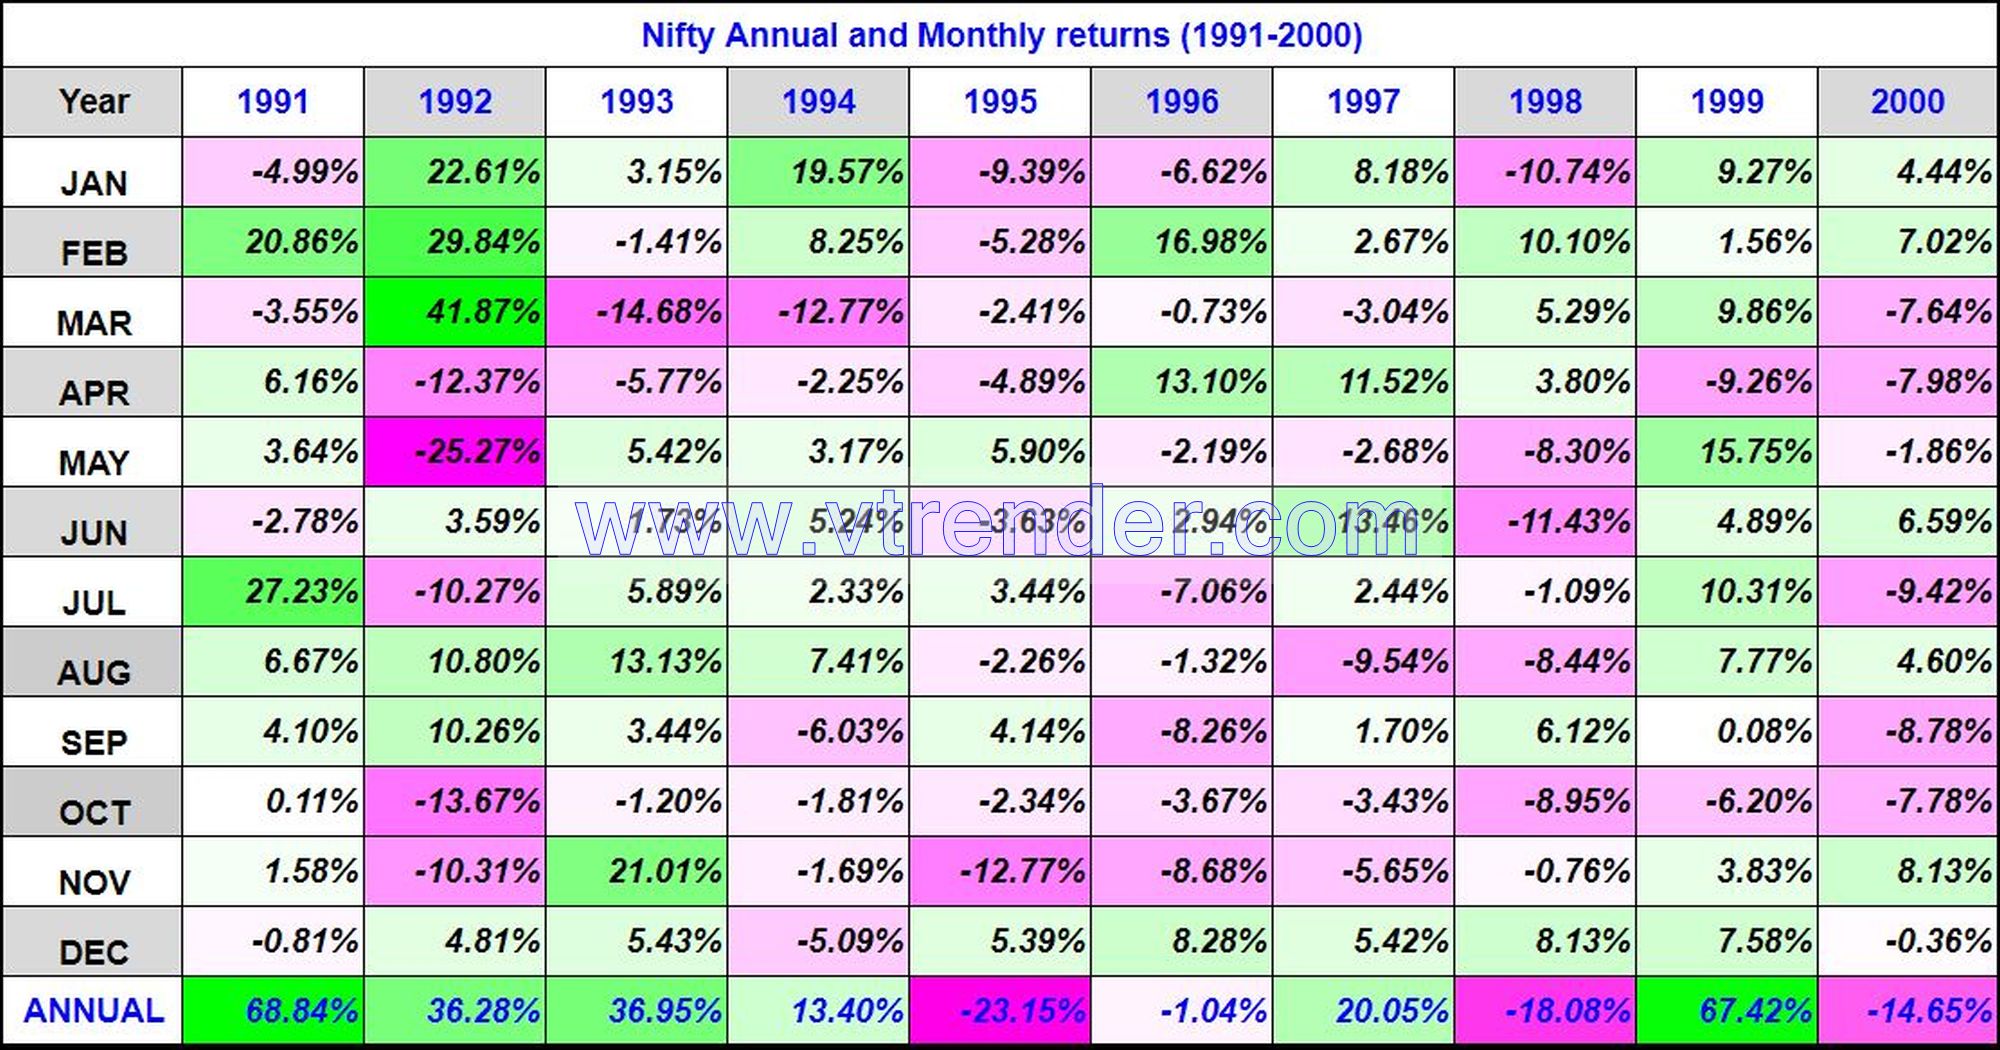 Niftyreturns1991 2000 Nifty 50 Monthly And Annual Returns (1991-2022) - 30Th Sep 2022 Annual, Monthly, Nifty Returns